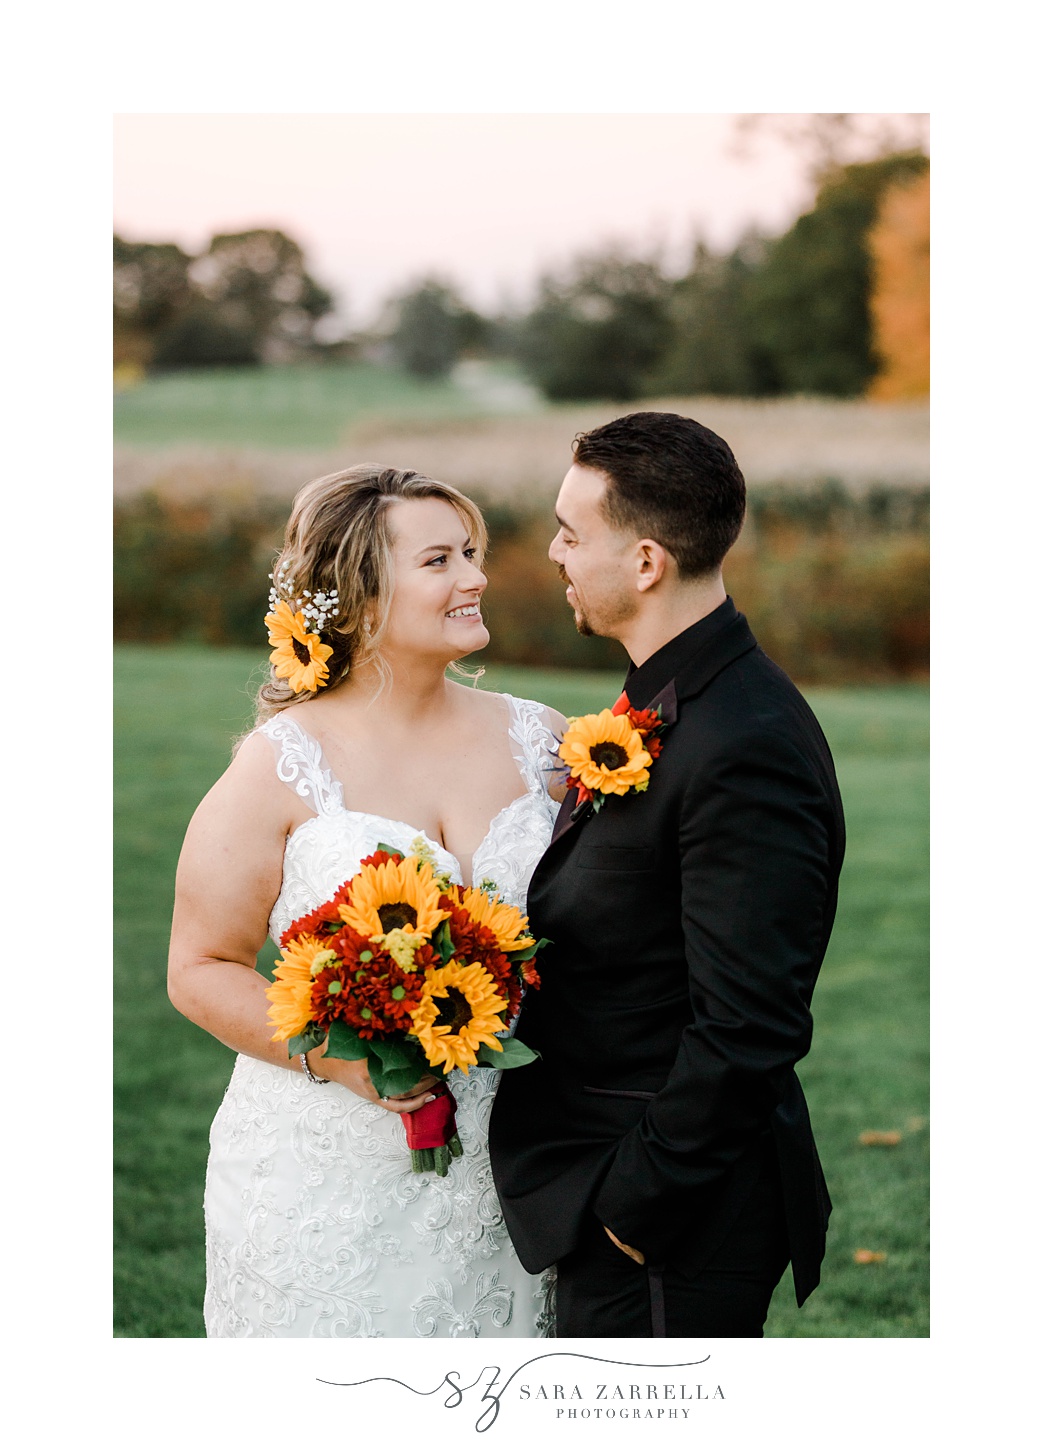 bride and groom hug smiling at each other with sunflower accents